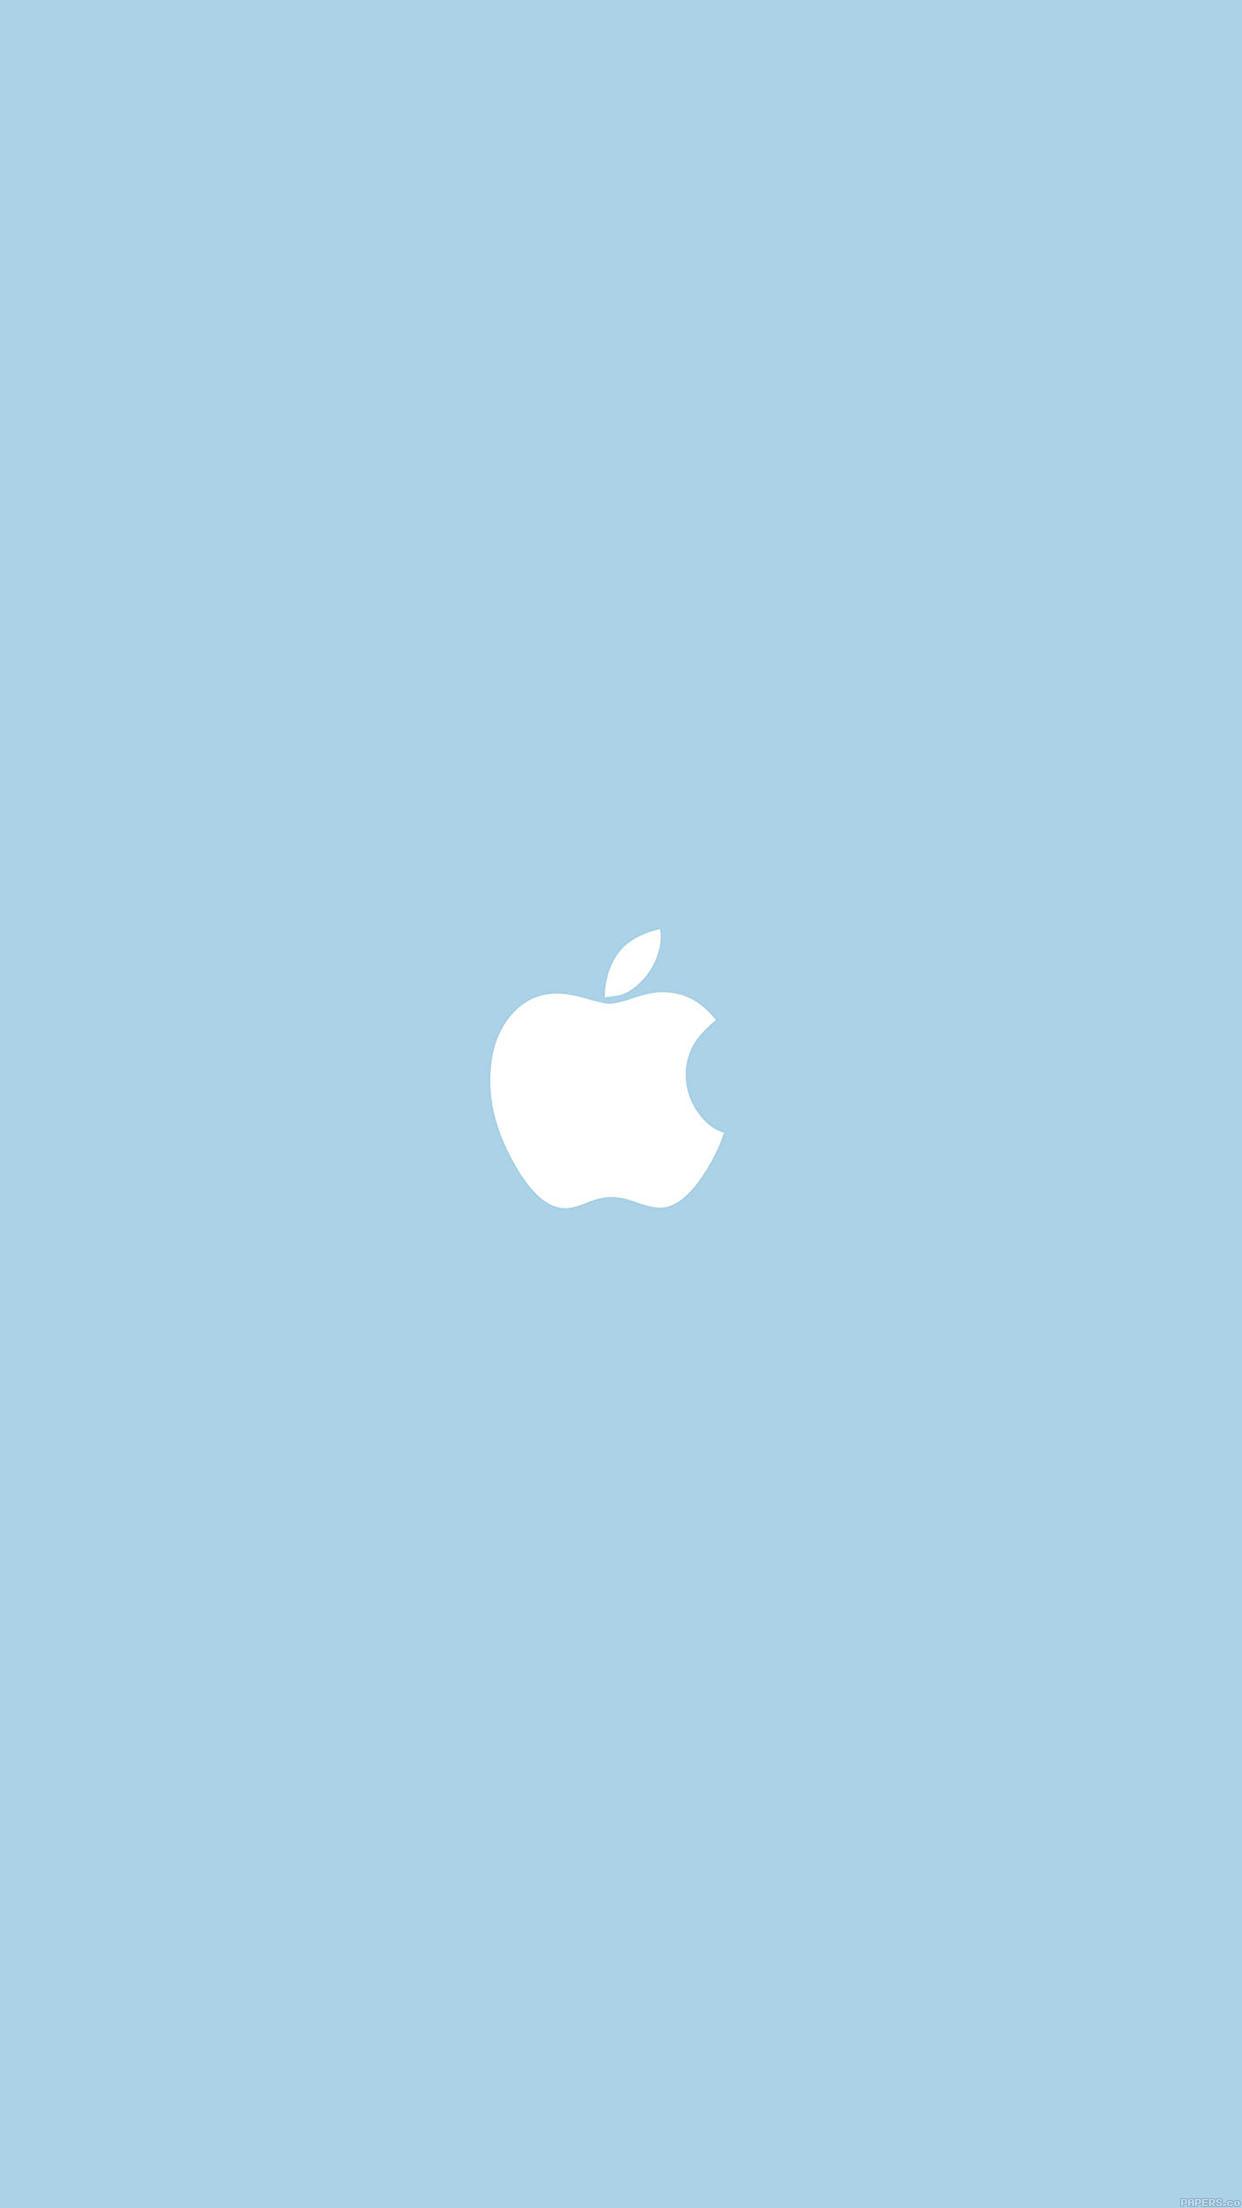 Wallpaper Weekends Apple for the iPhone 6 Plus